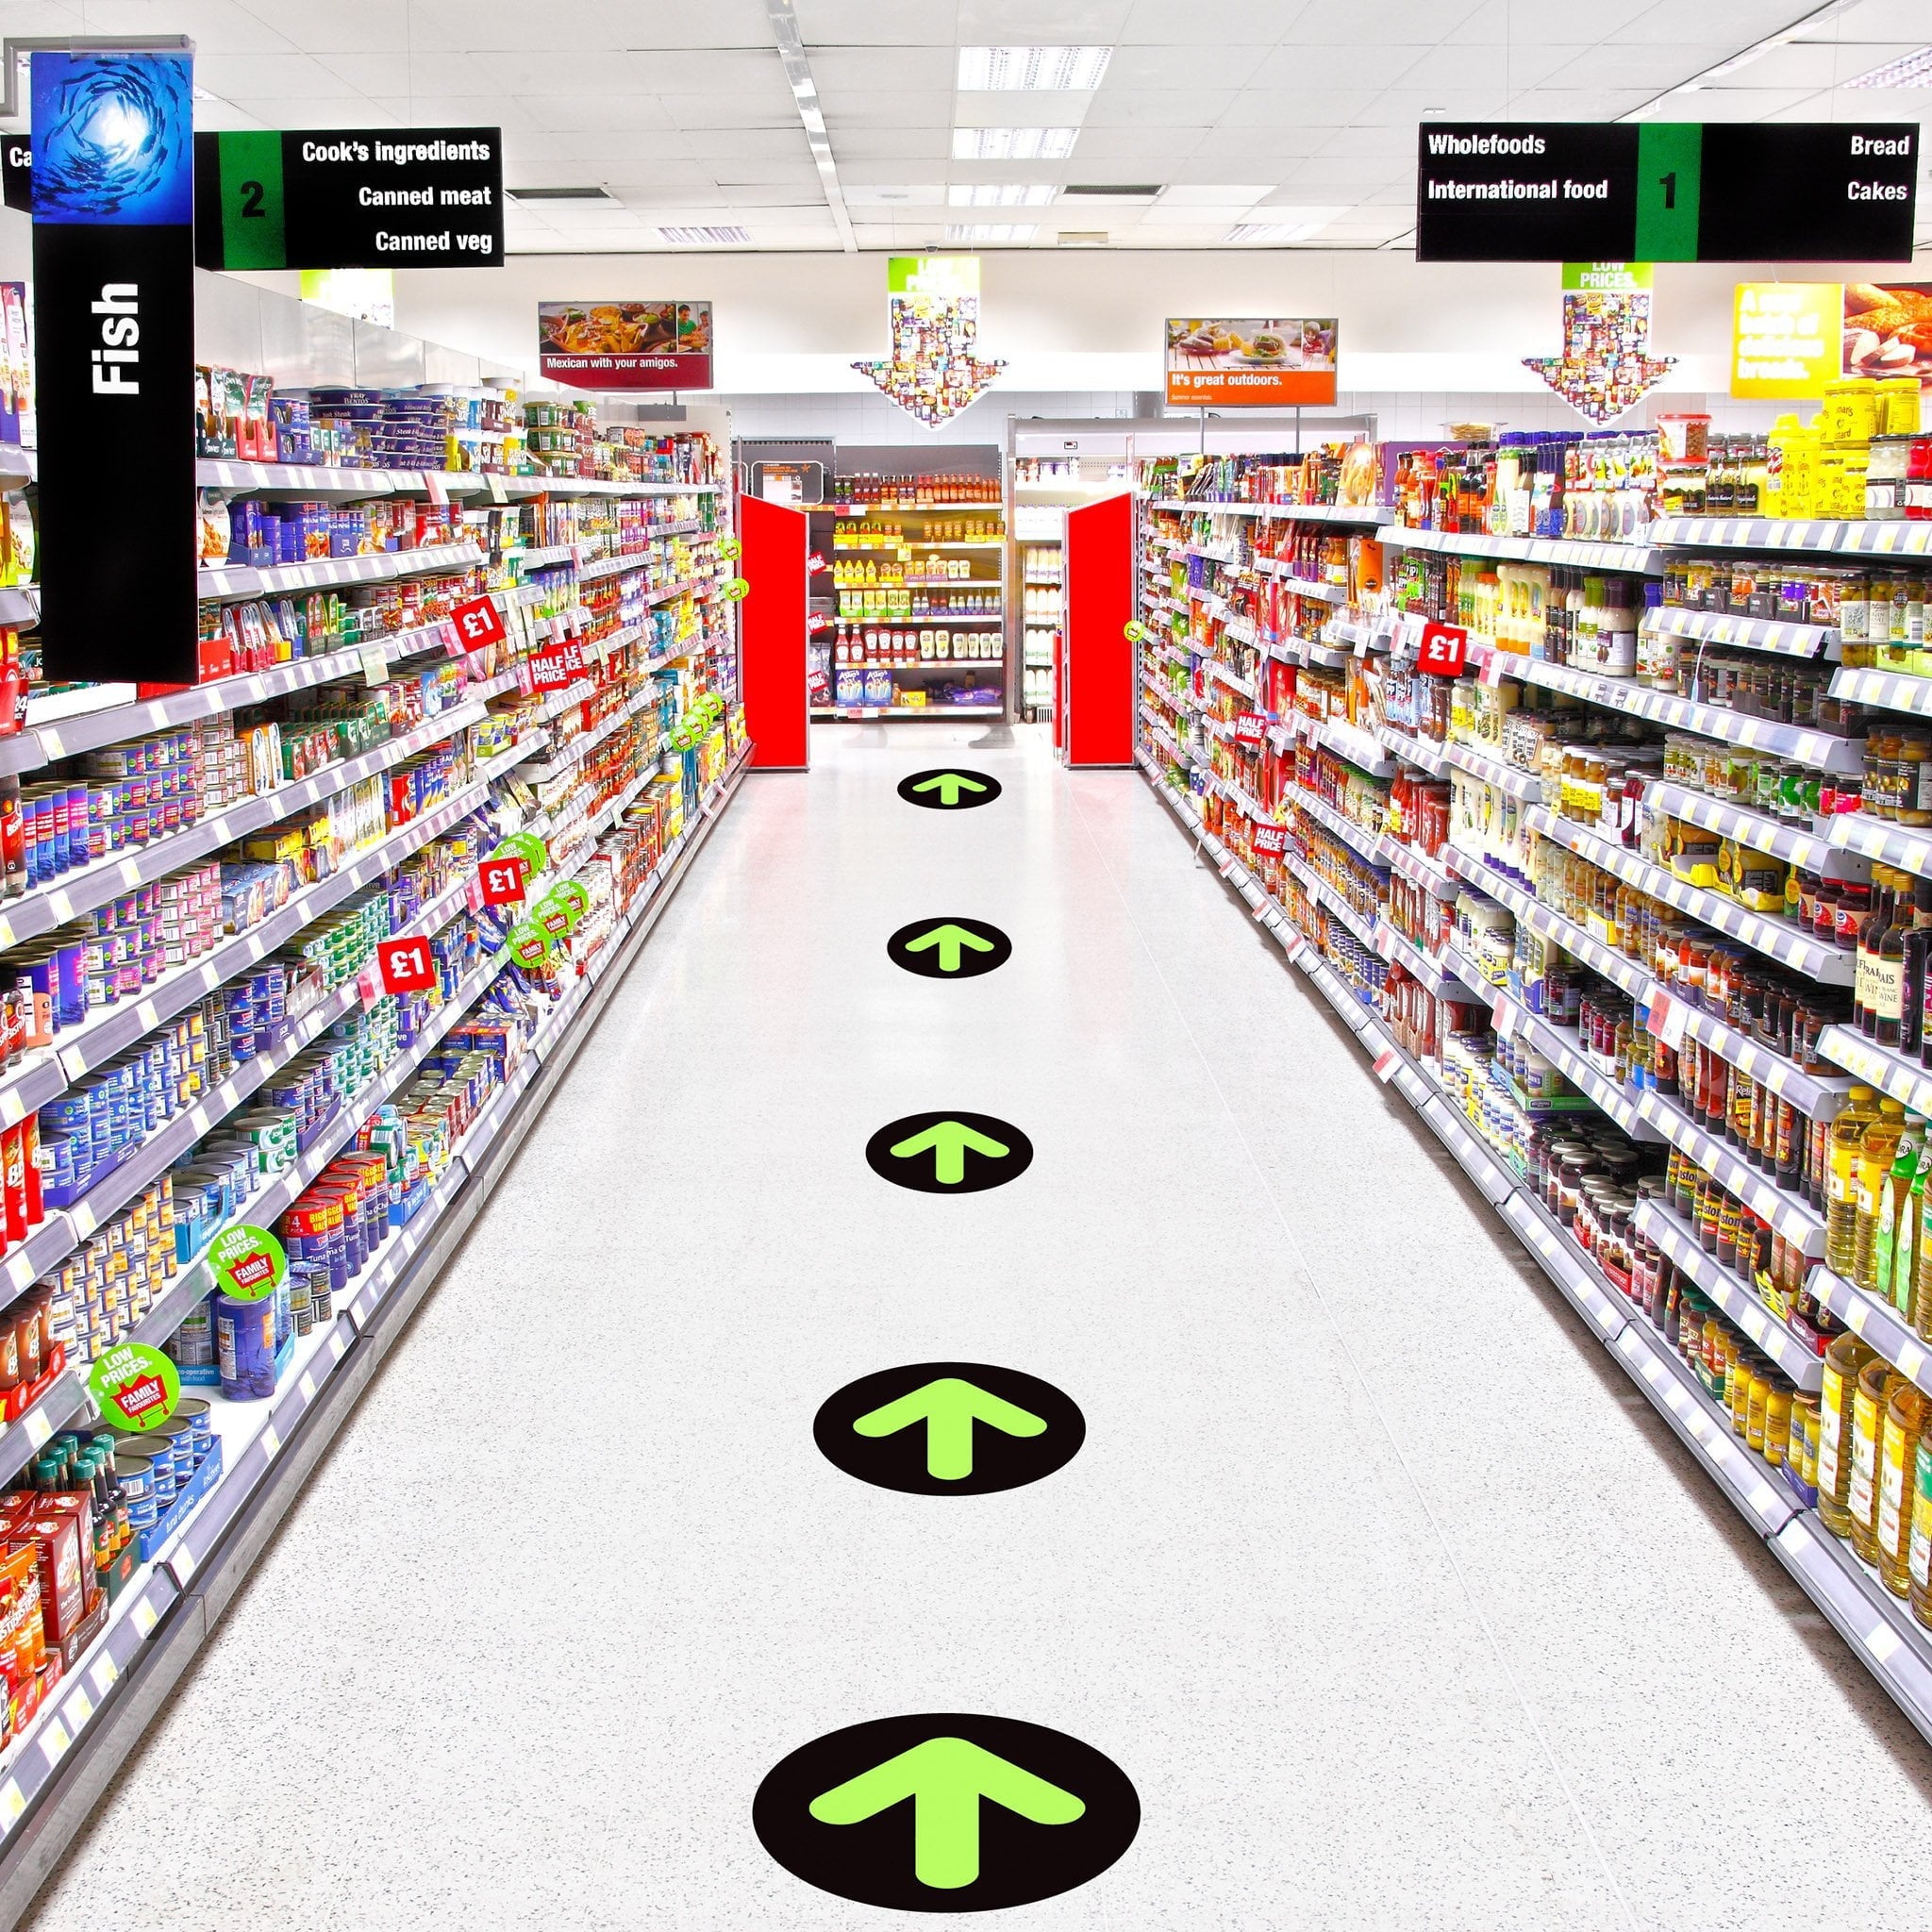 Arrow floor stickers in a grocery market helping to direct customers